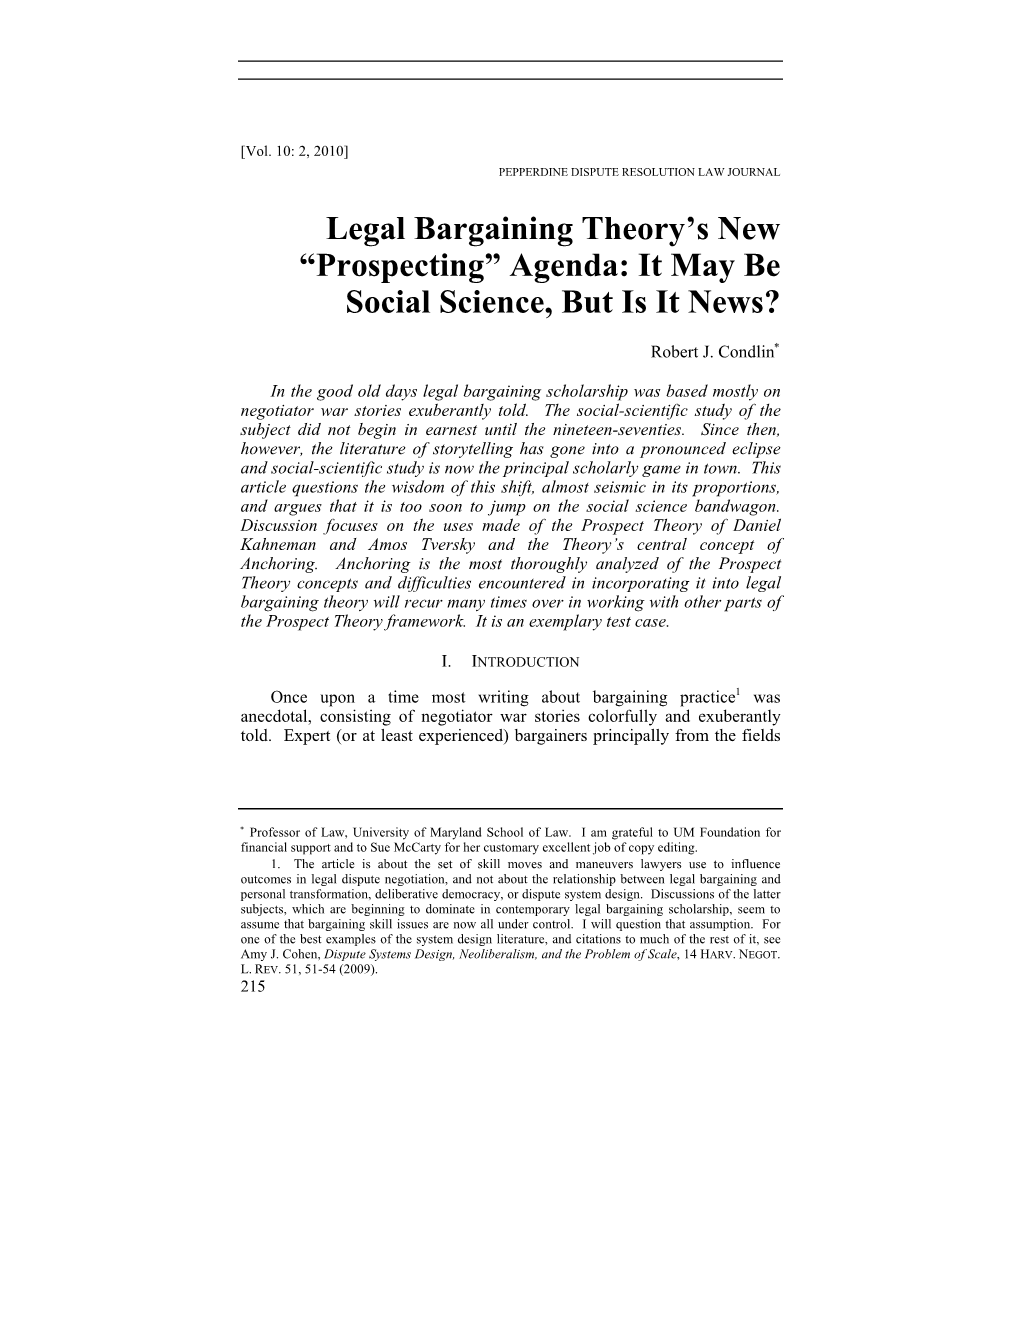 Legal Bargaining Theory's New “Prospecting” Agenda: It May Be Social Science, but Is It News?